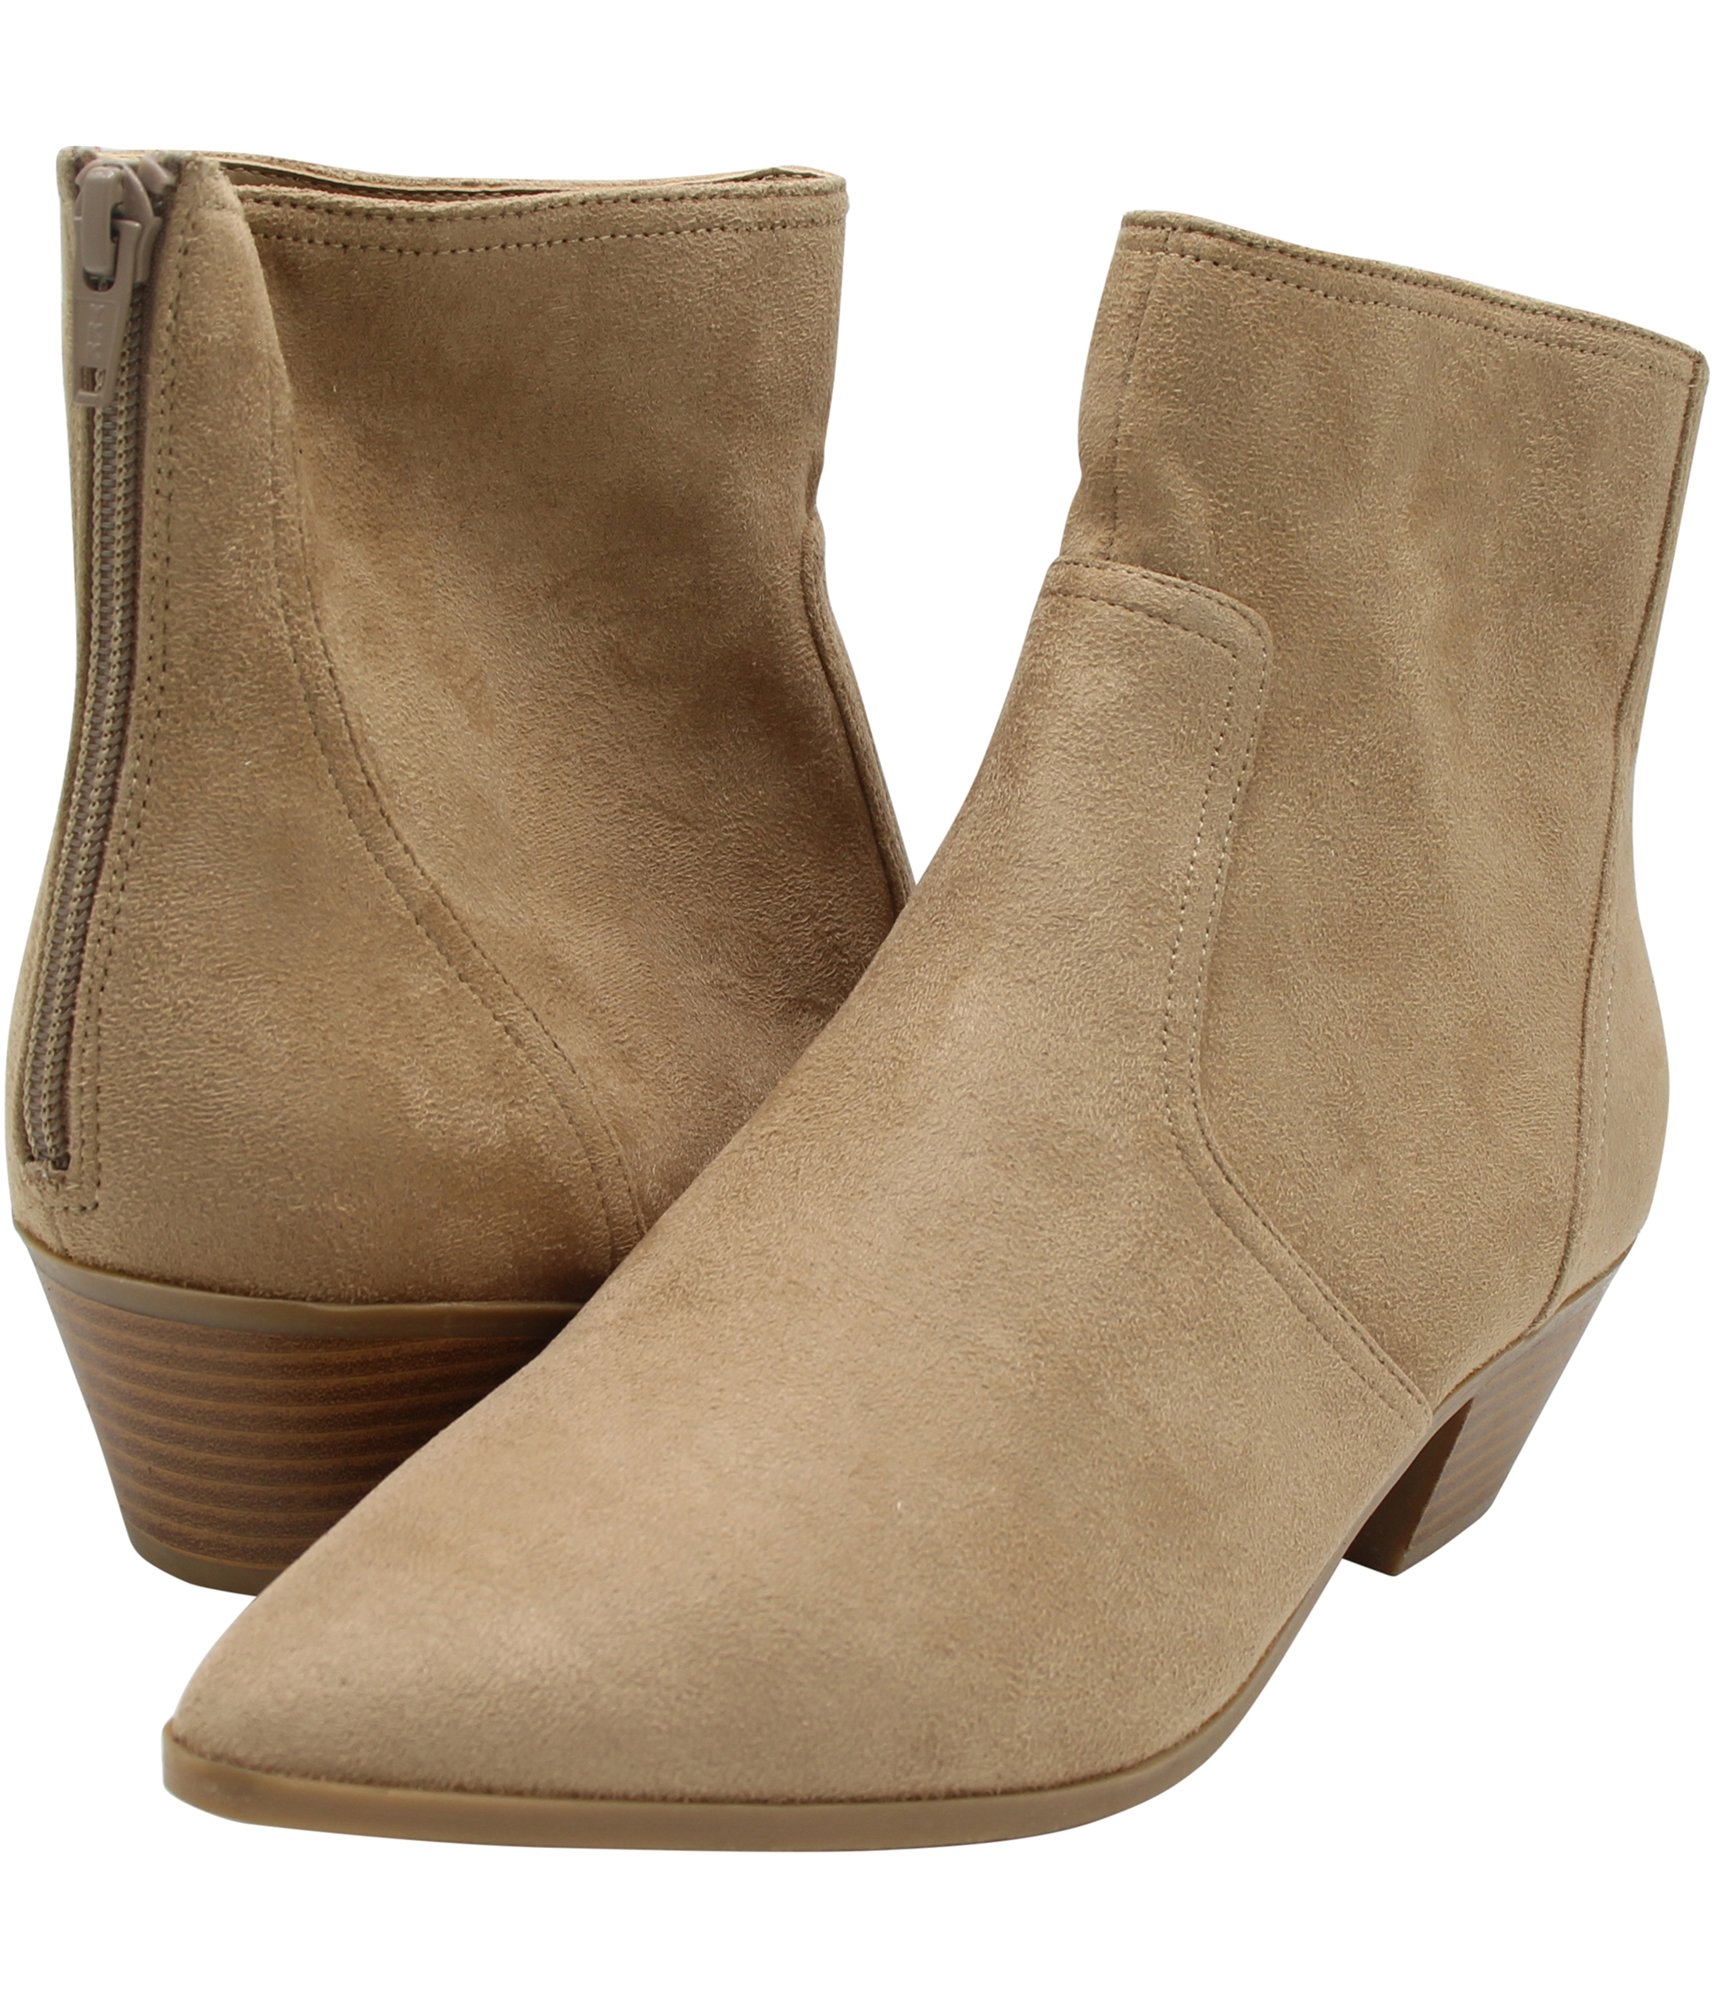 Faux-suede-boots-for-women